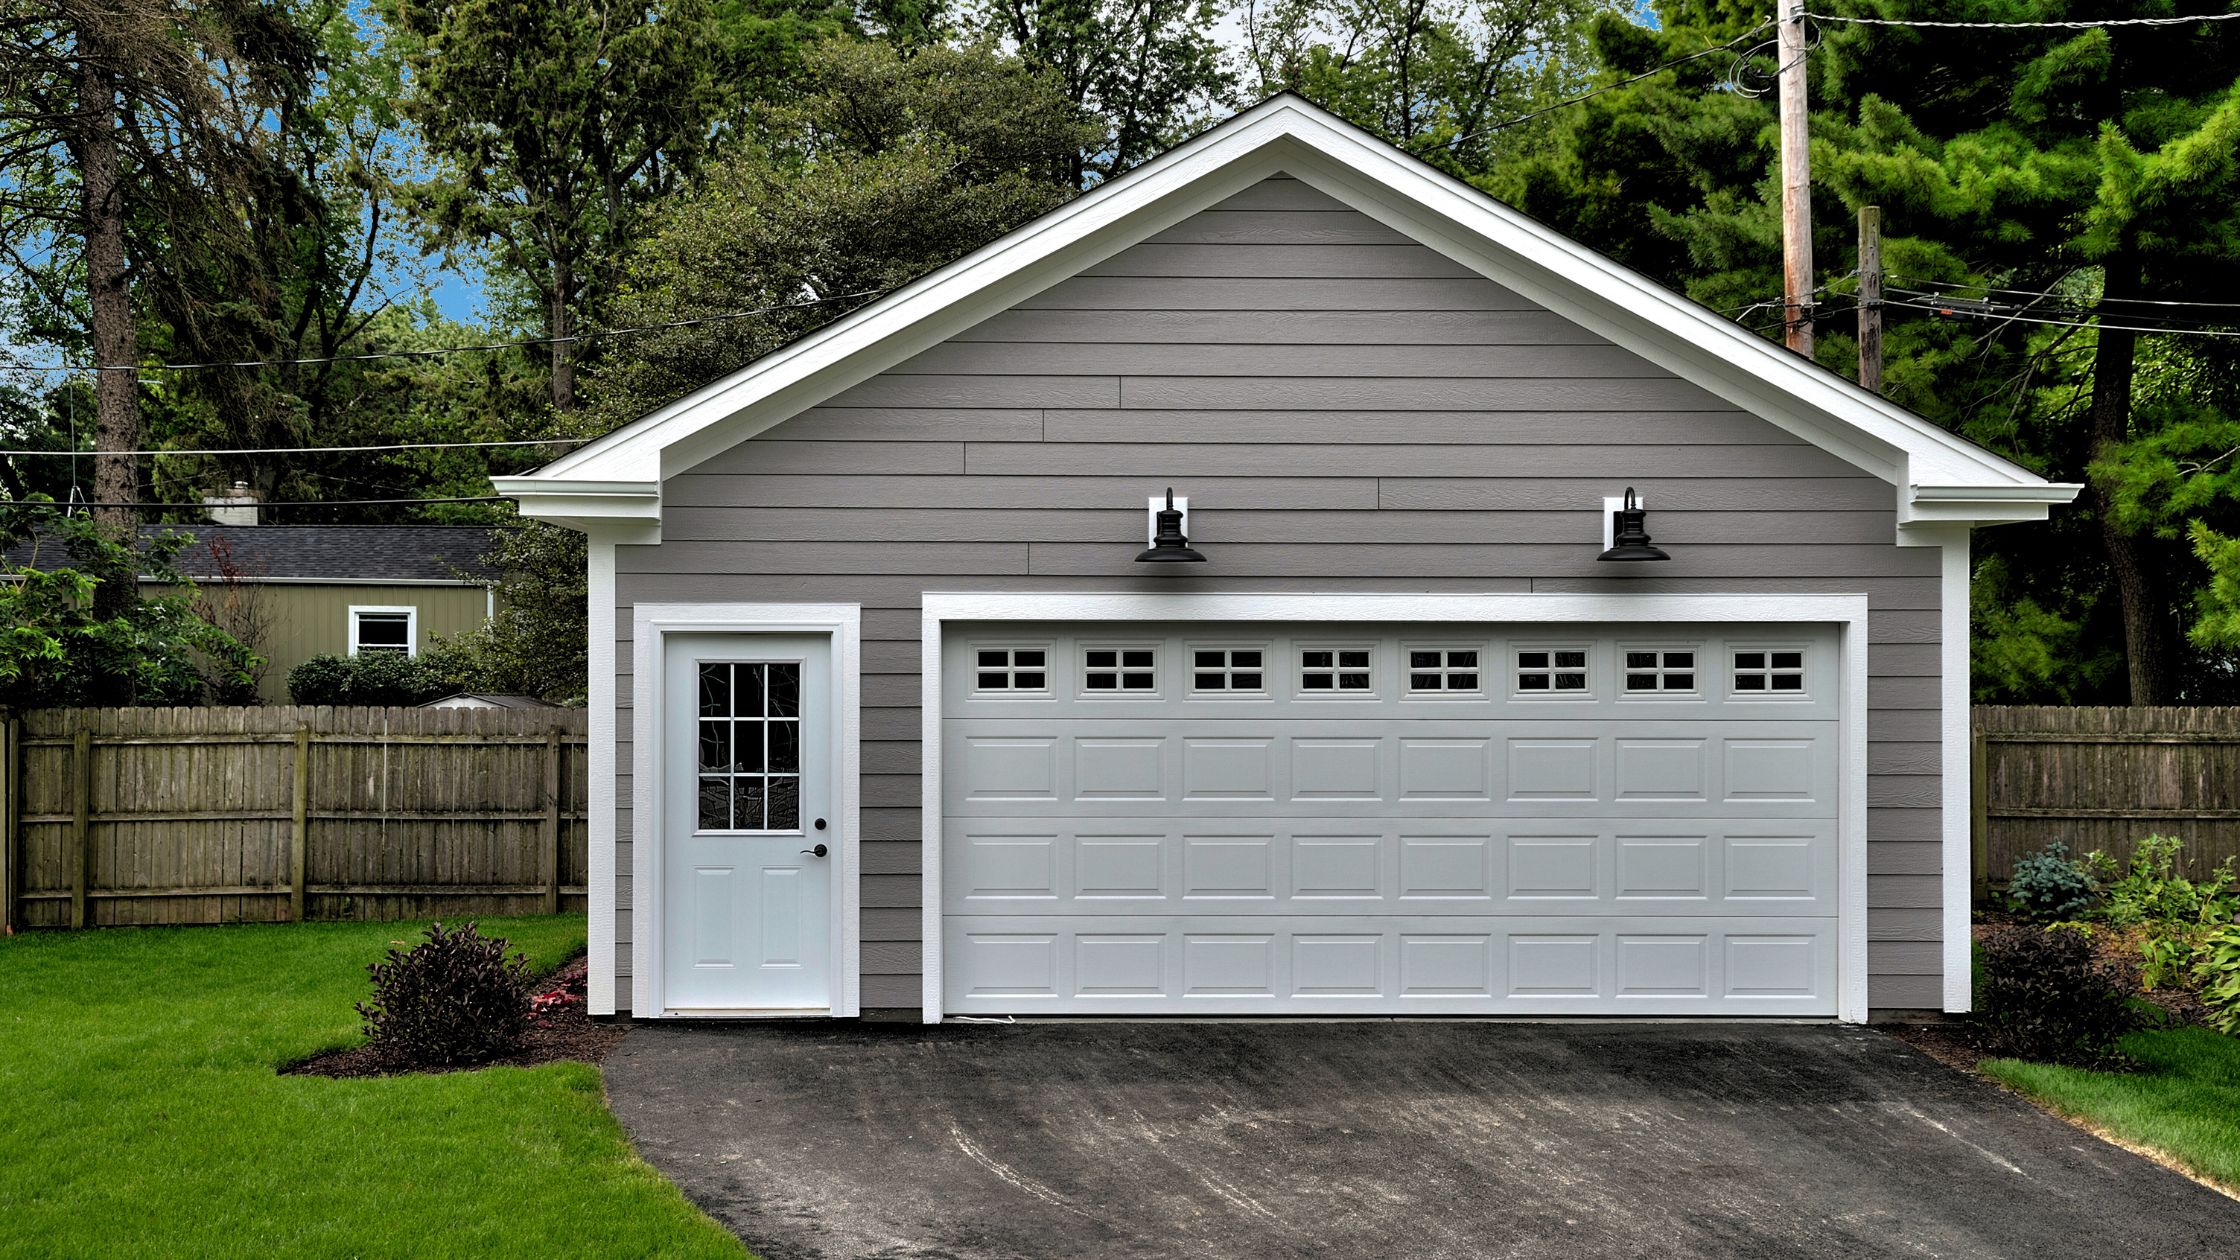 The exterior of a garage is pictured emphasizing the benefits of a tidy garage for summer.